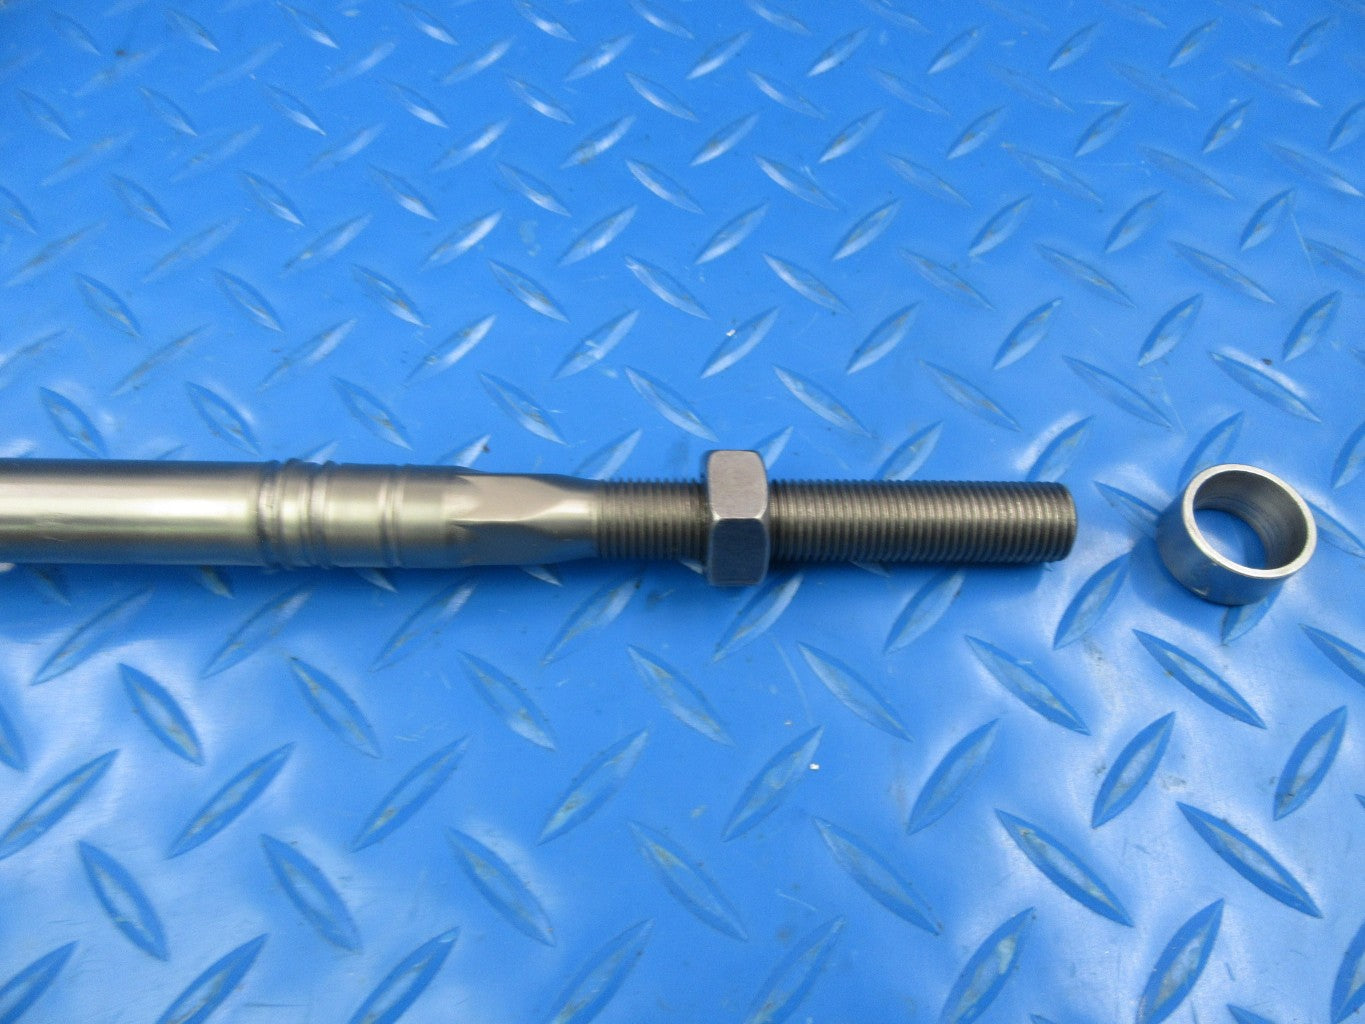 Rolls Royce Ghost Dawn Wraith left or right inner tie rod end #9068 1pc